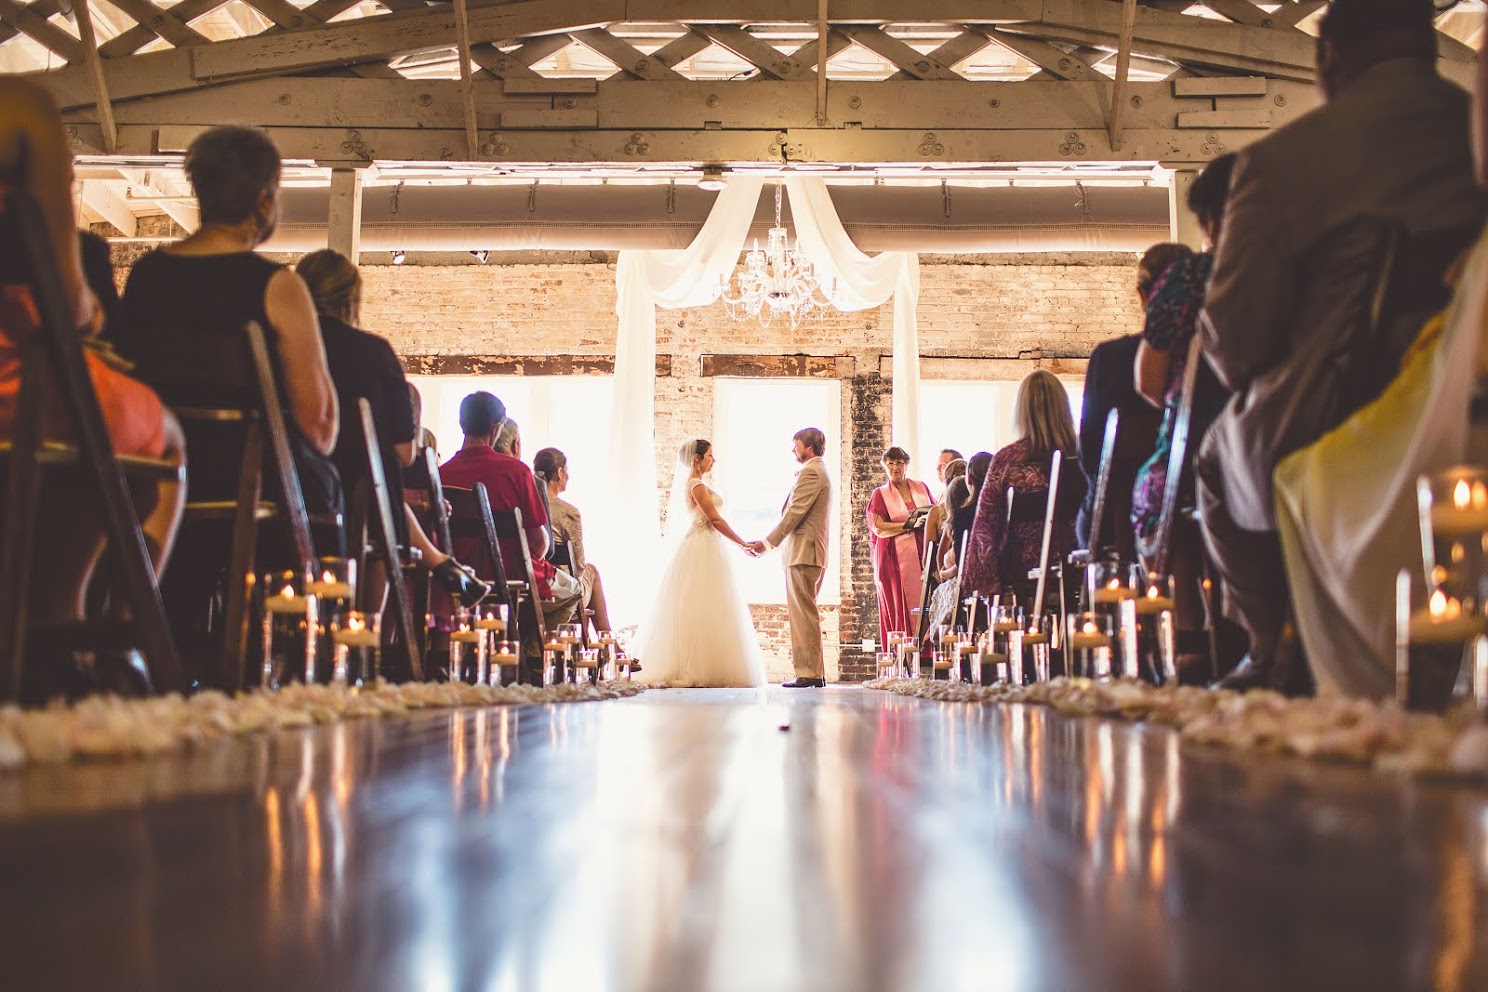  &nbsp;Wedding at the Stockroom at 230 in Raleigh. Photo compliments of photographer Michael Moss. 